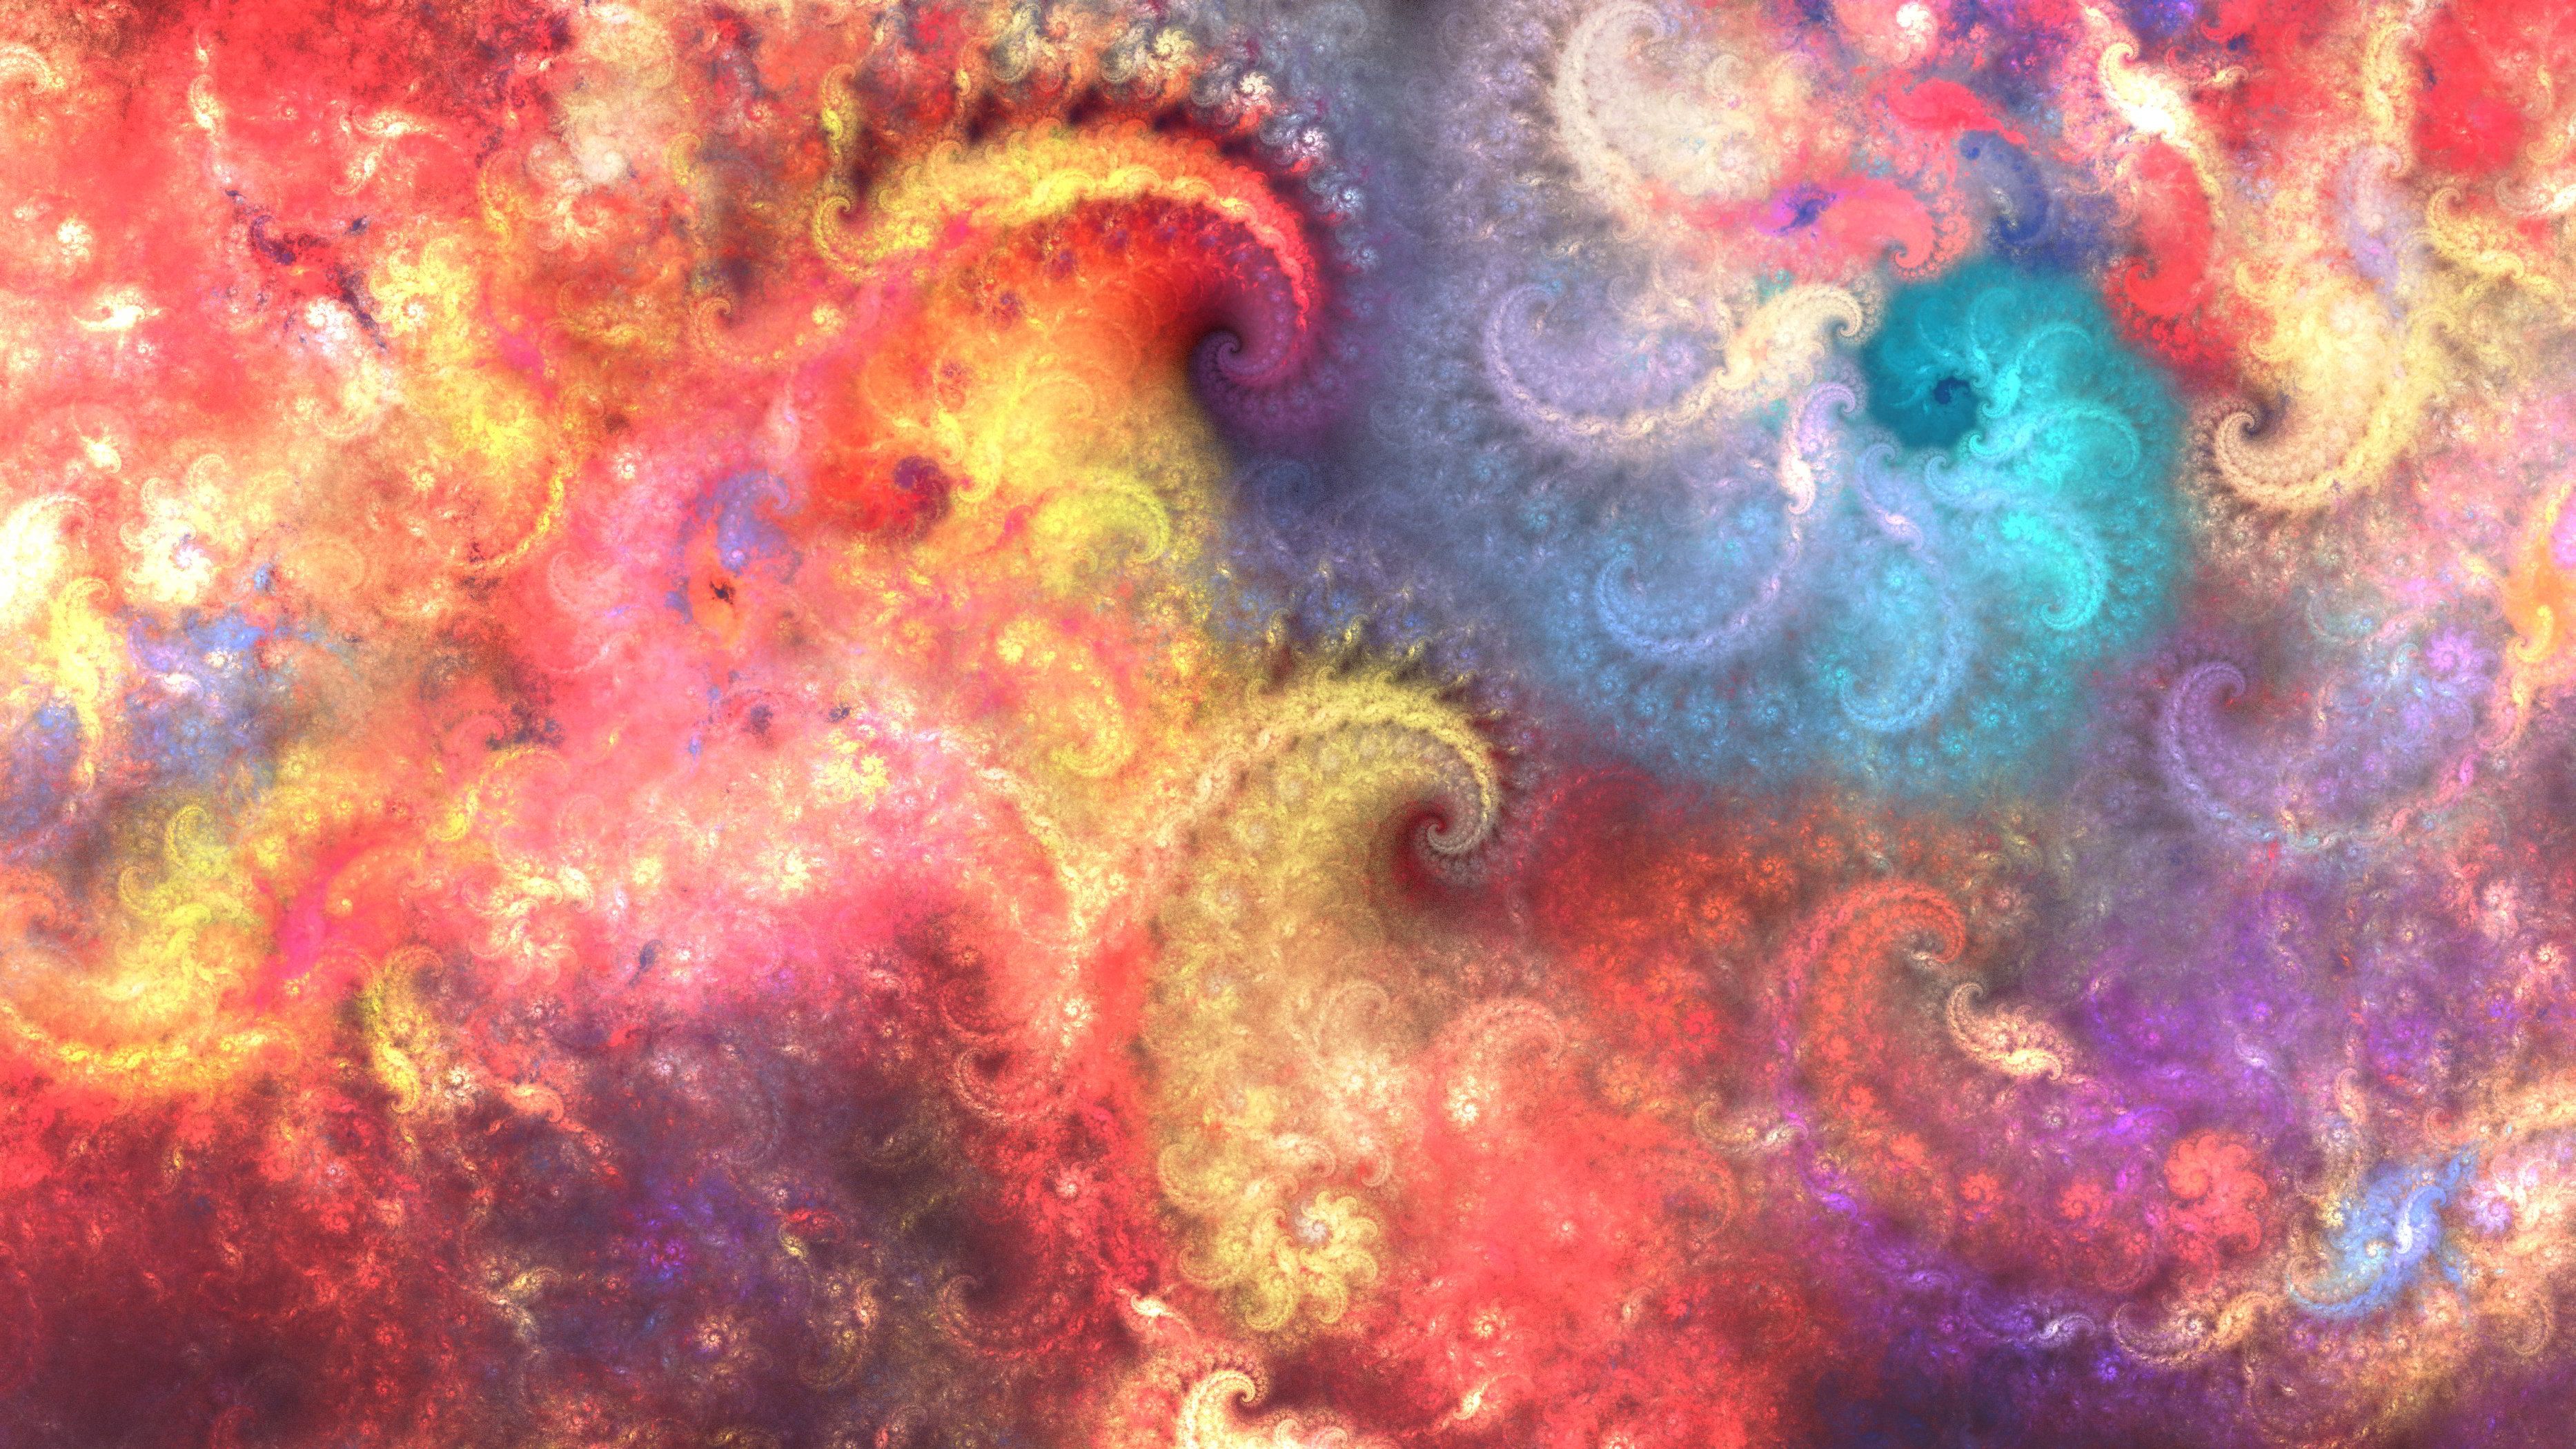 Patterns Wallpaper, 33 Full HQFX Patterns Image (In HQFX, PP)